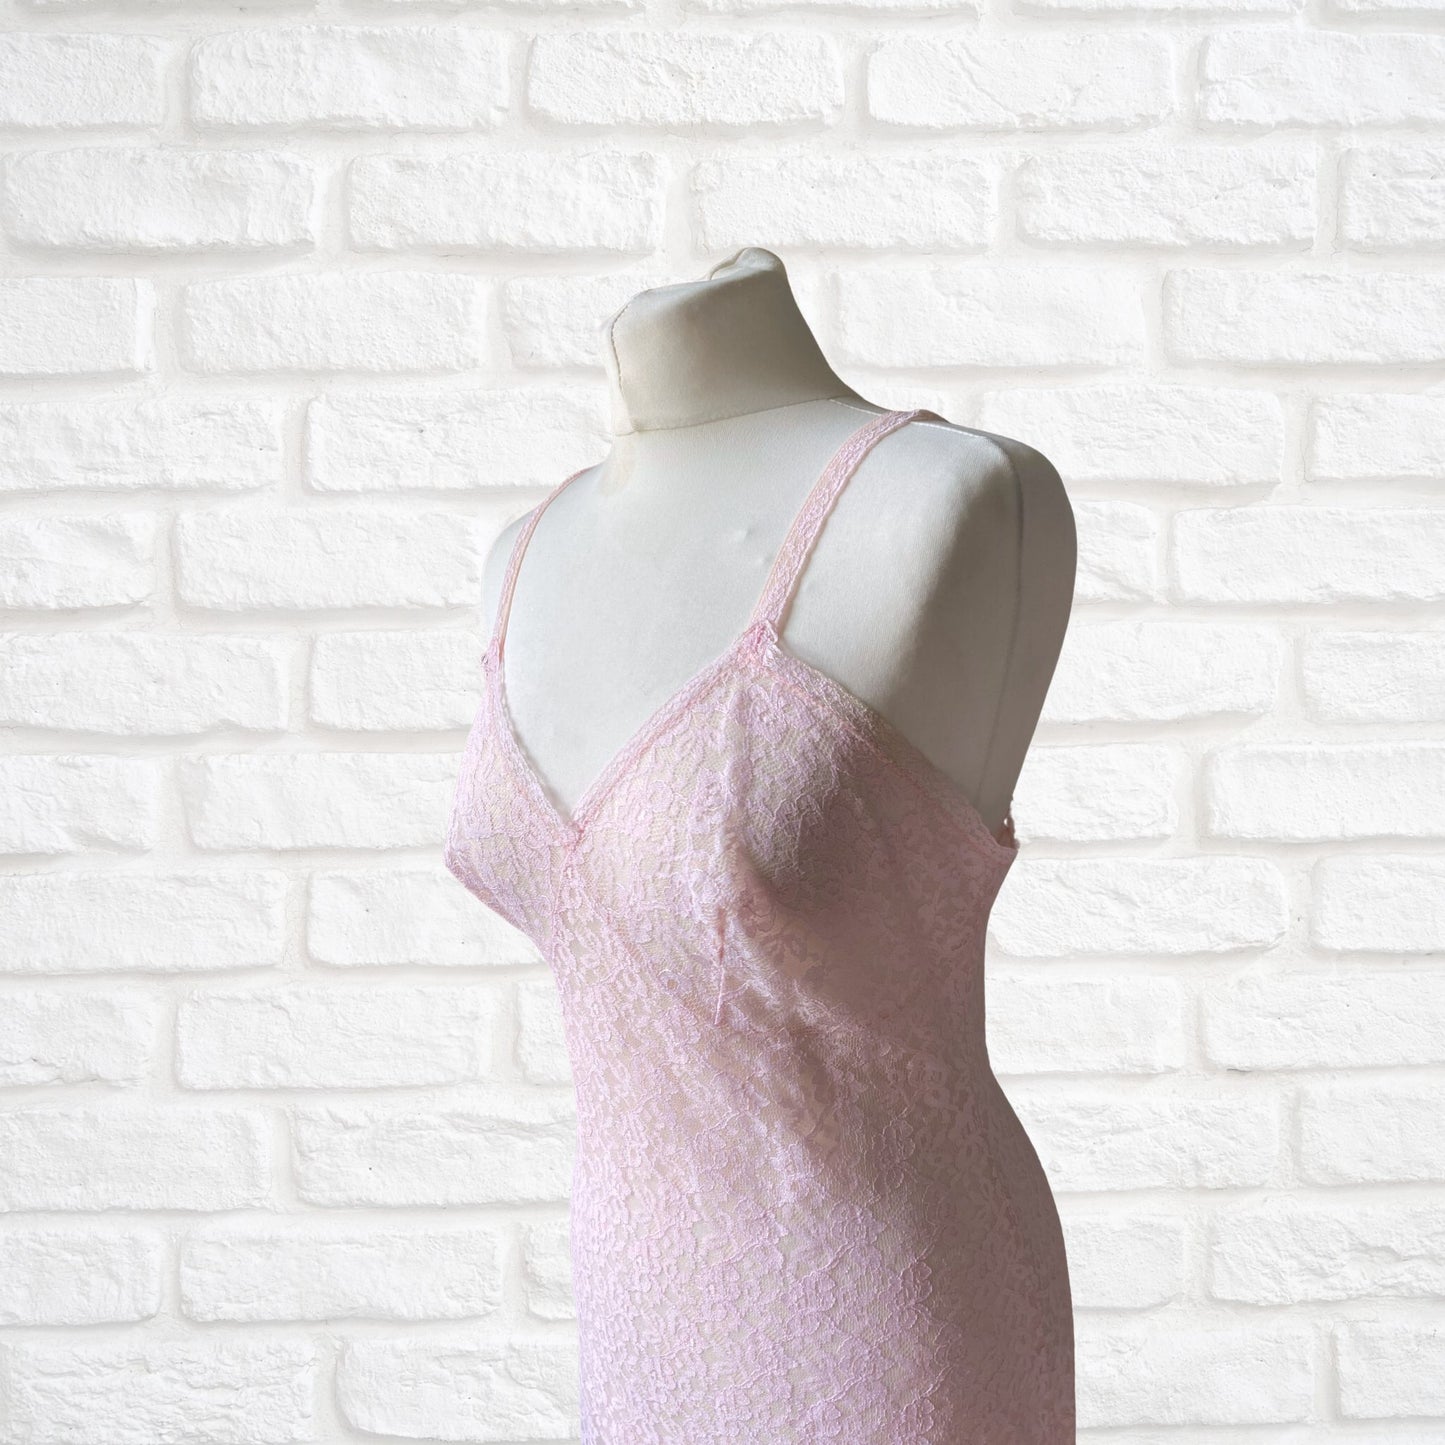 60s pink lace fitted full slip by St. Michael. Approx U.K. size 8-10